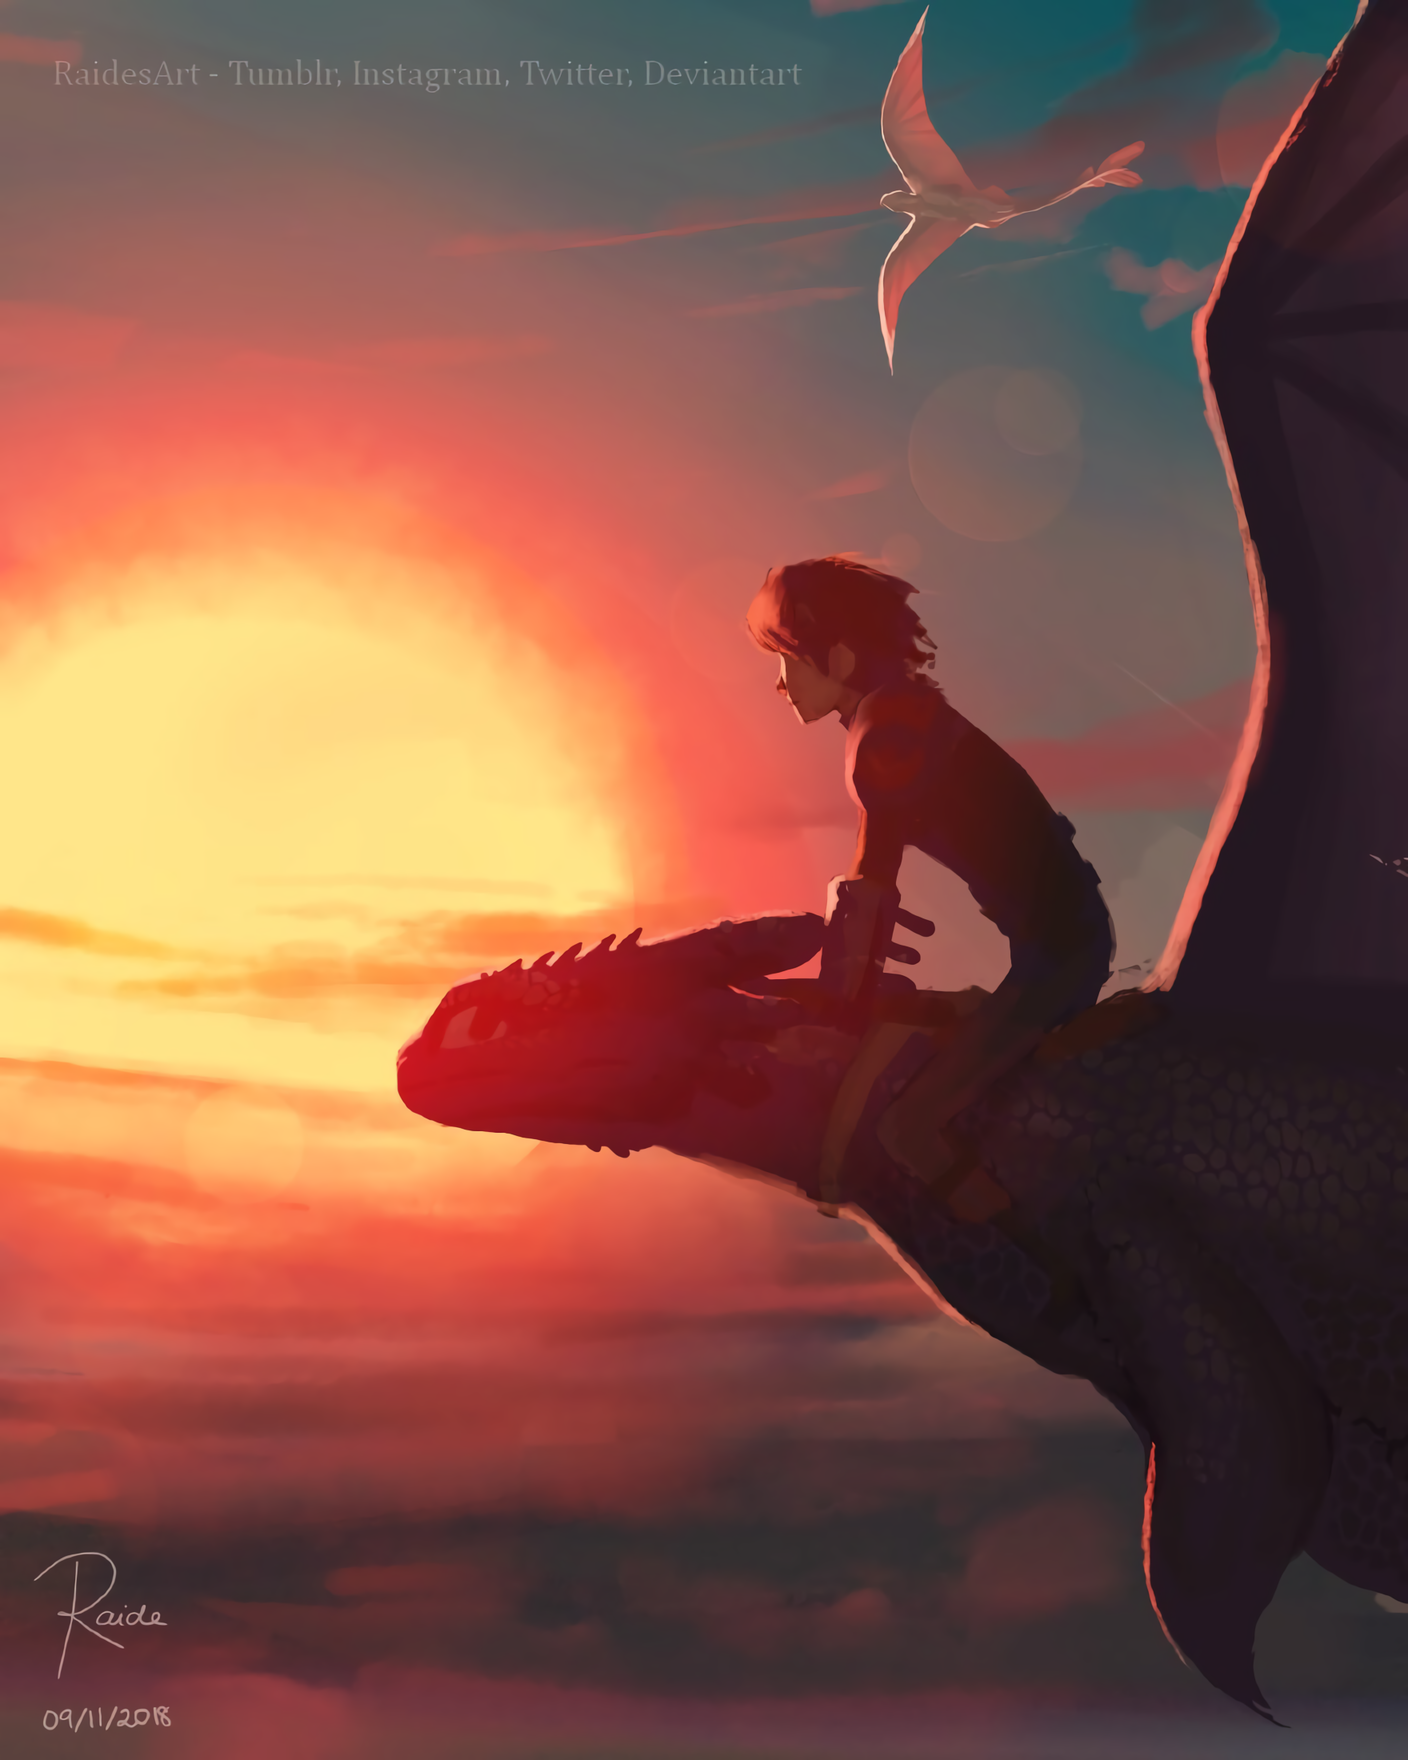 Above the Clouds - Art, How to train your dragon, Hiccup, Toothless, Day Fury, The Dragon, Sunset, Raidesart